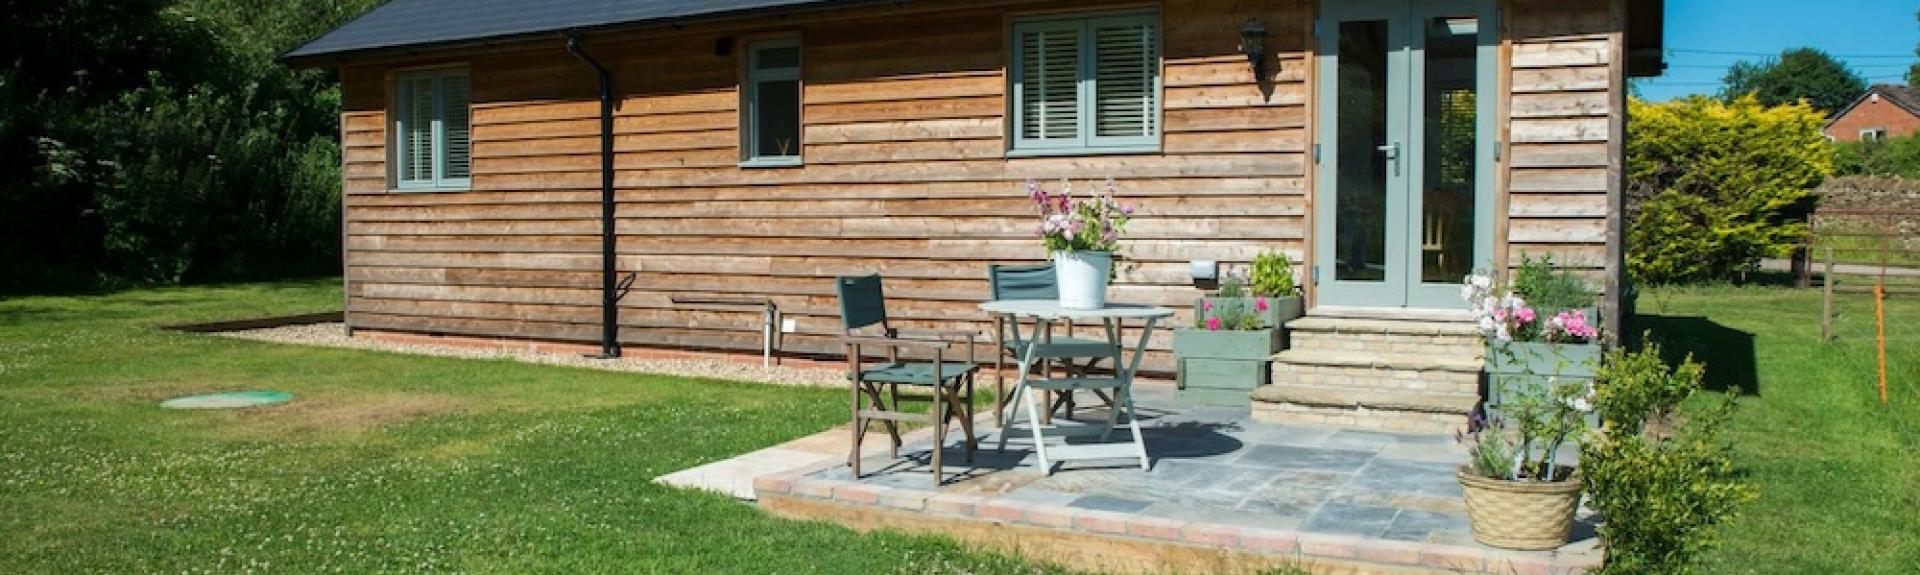 A weatherboard barn conversion with a patio having a small table and chairs.